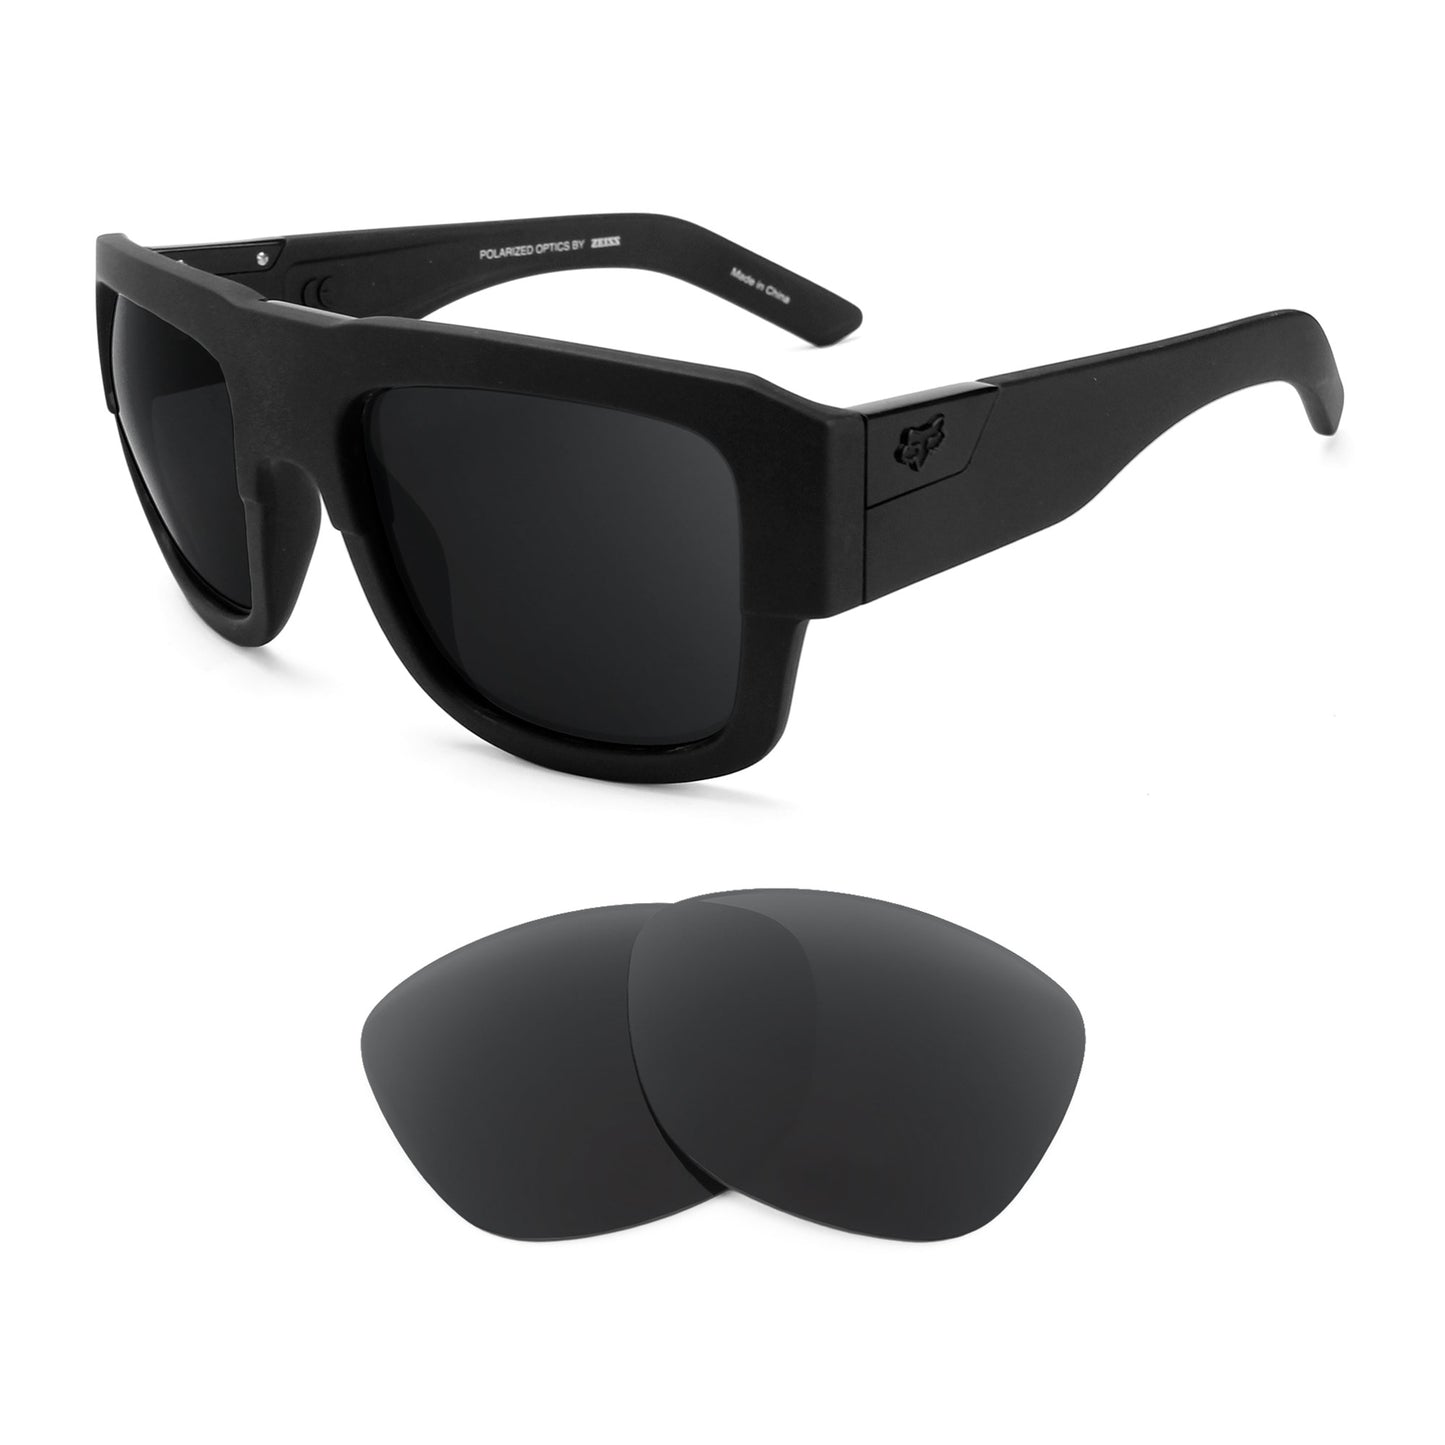 Fox Racing The Decorum sunglasses with replacement lenses